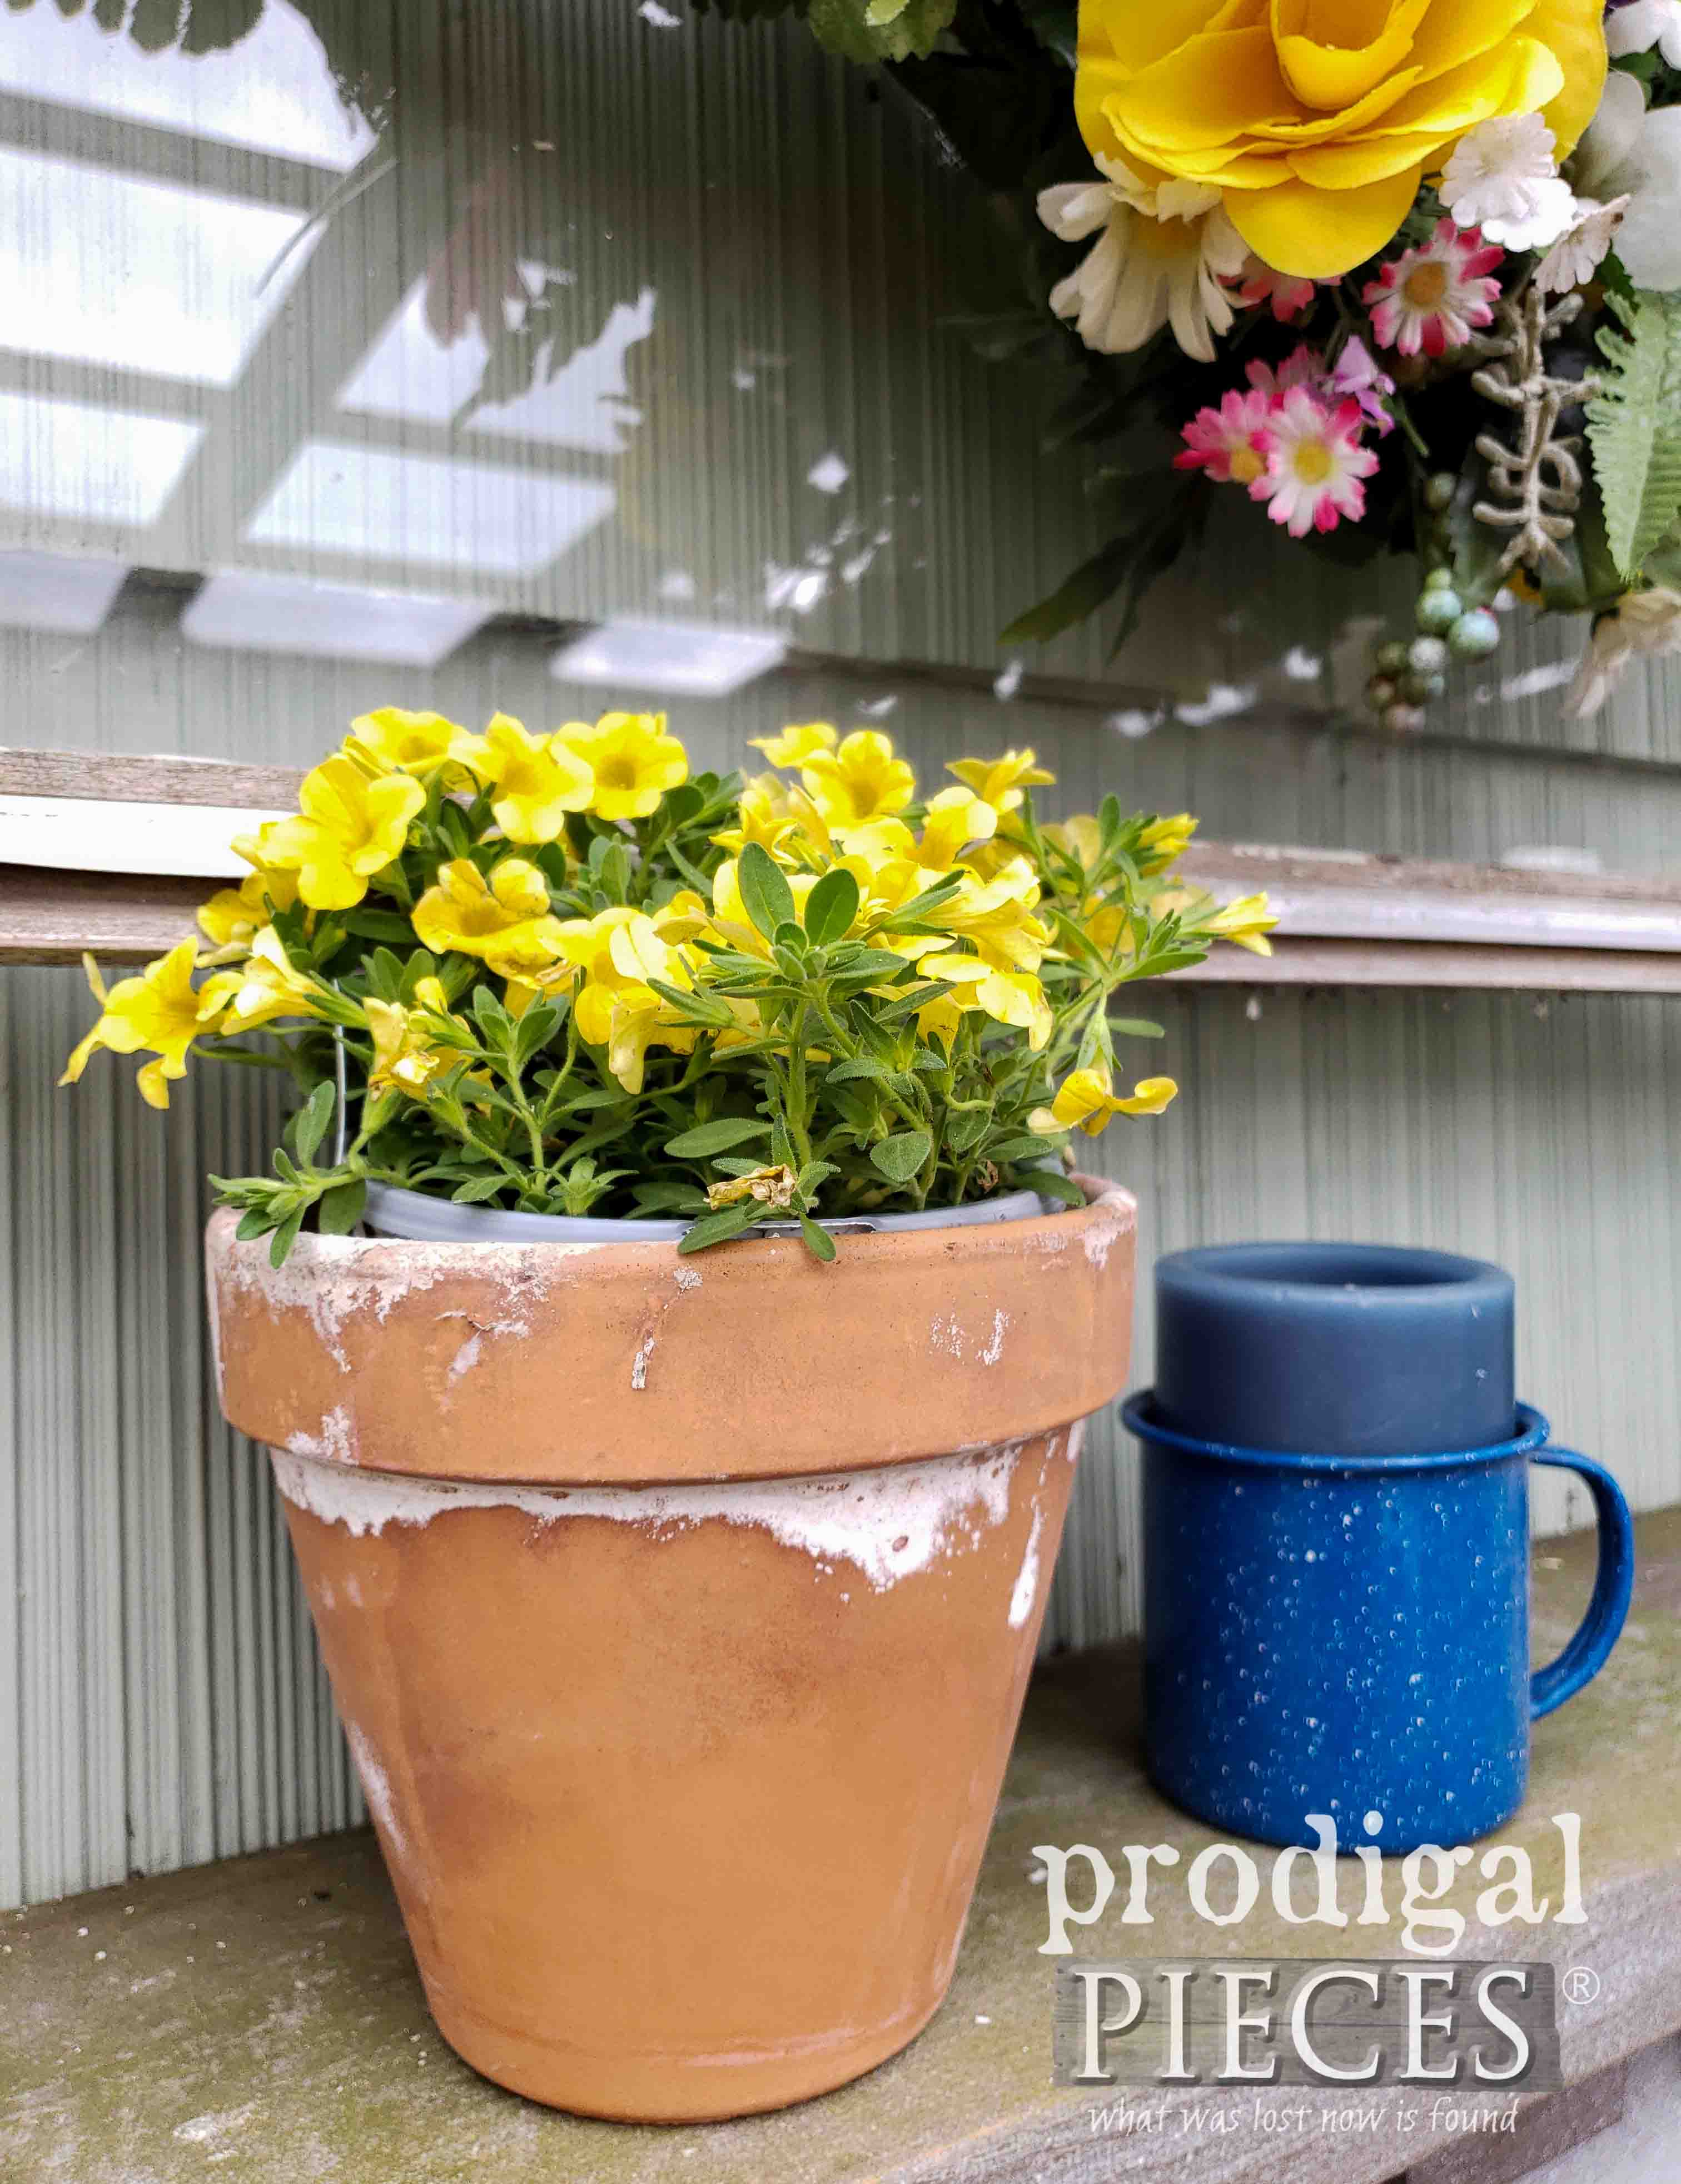 Yellow Flowers in Terra Cotta Pot by Prodigal Pieces | prodigalpieces.com #prodigalpieces #garden #flowers #spring #mothersday